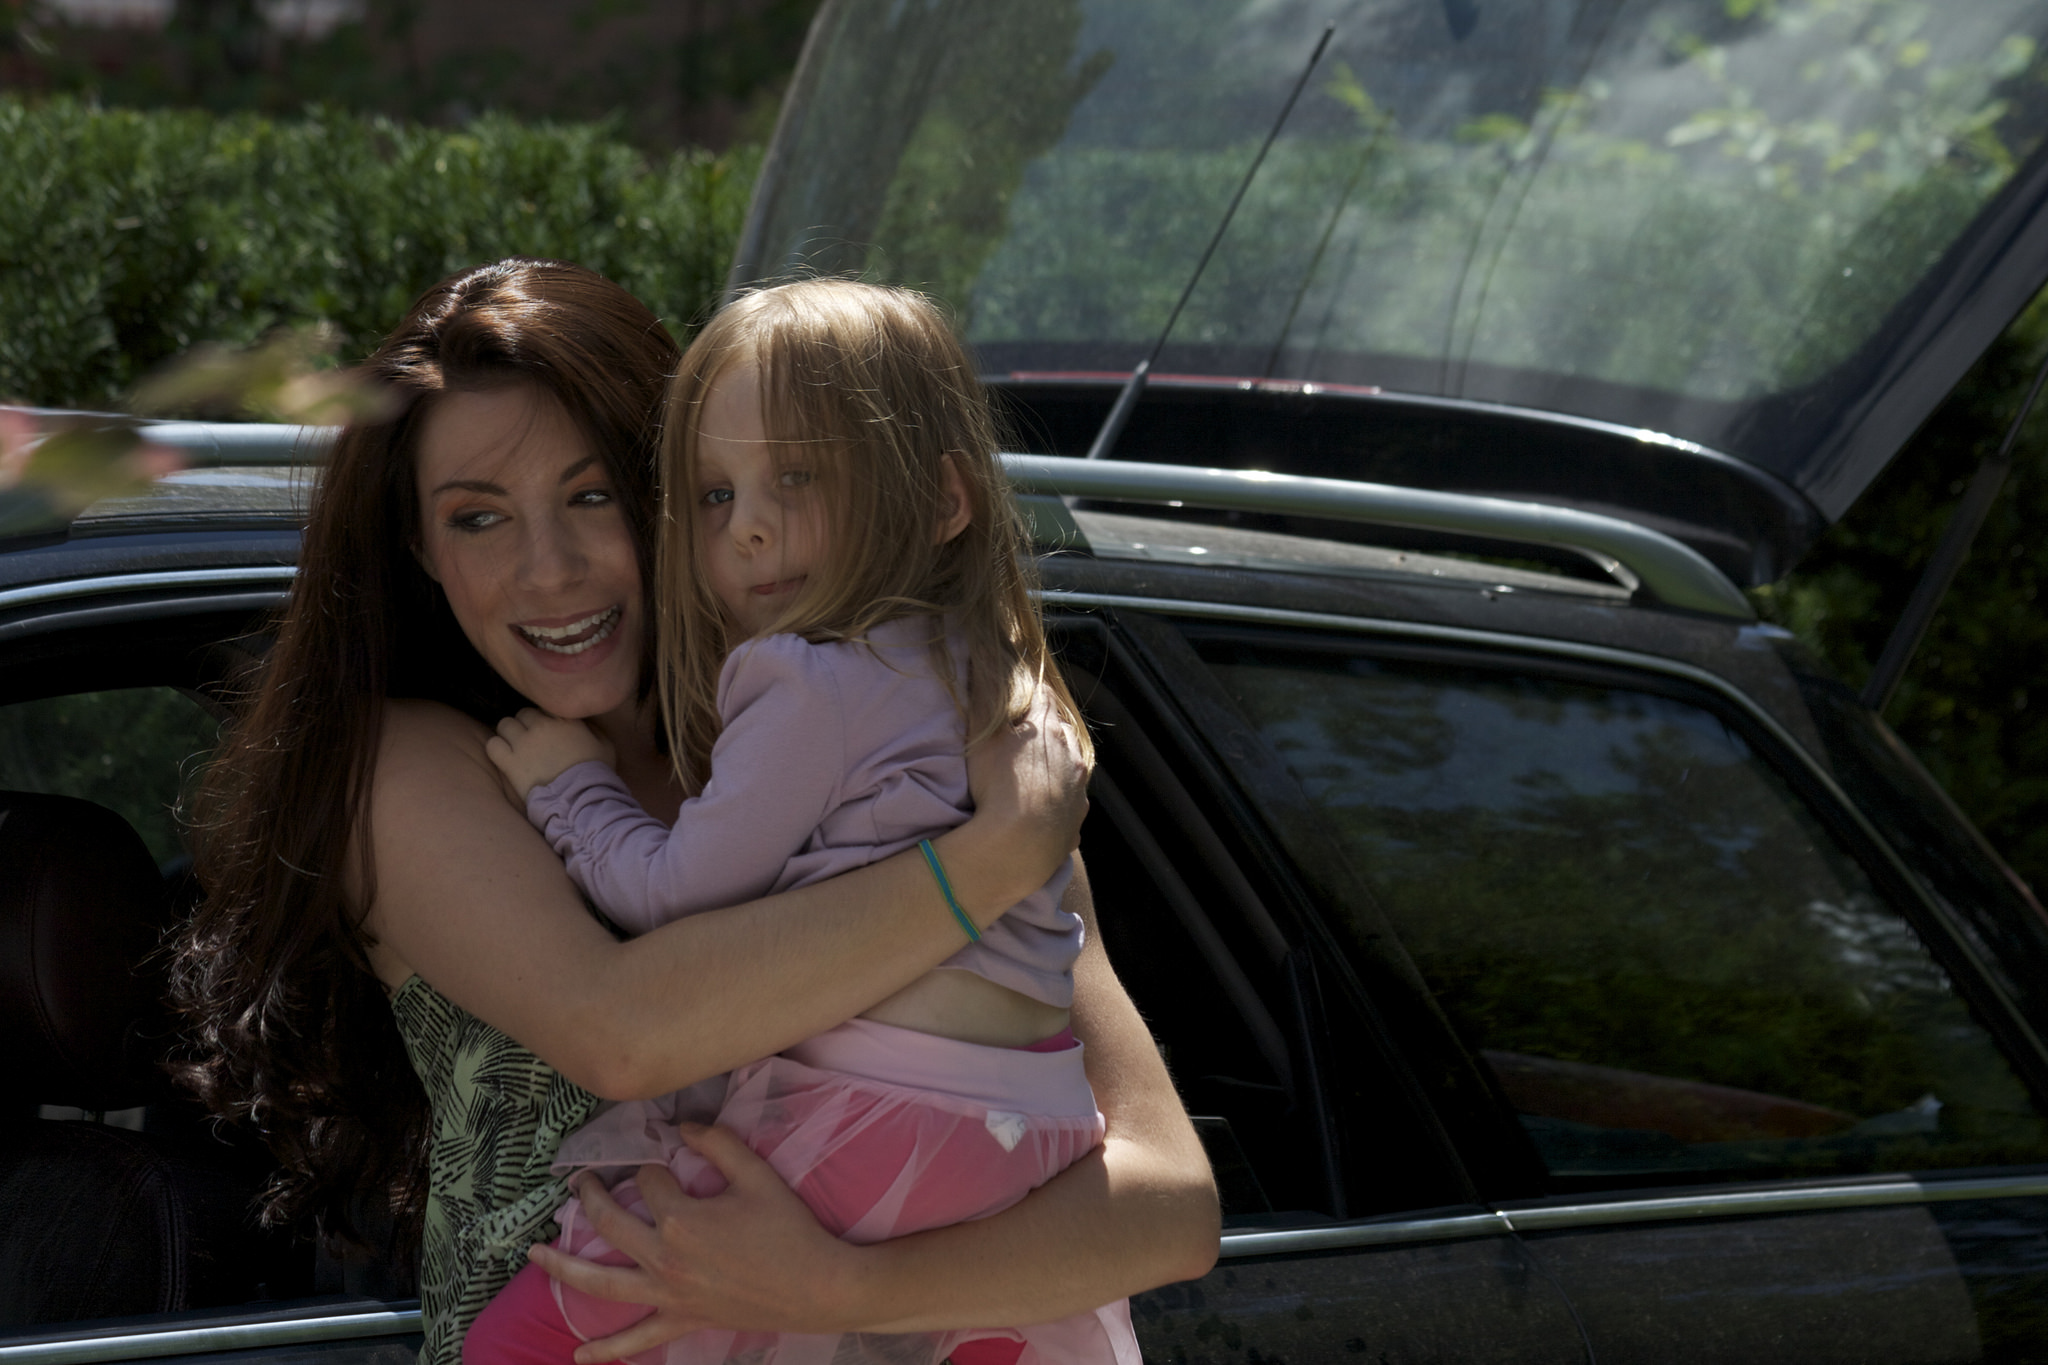 Still of Deanna Little in After Lola